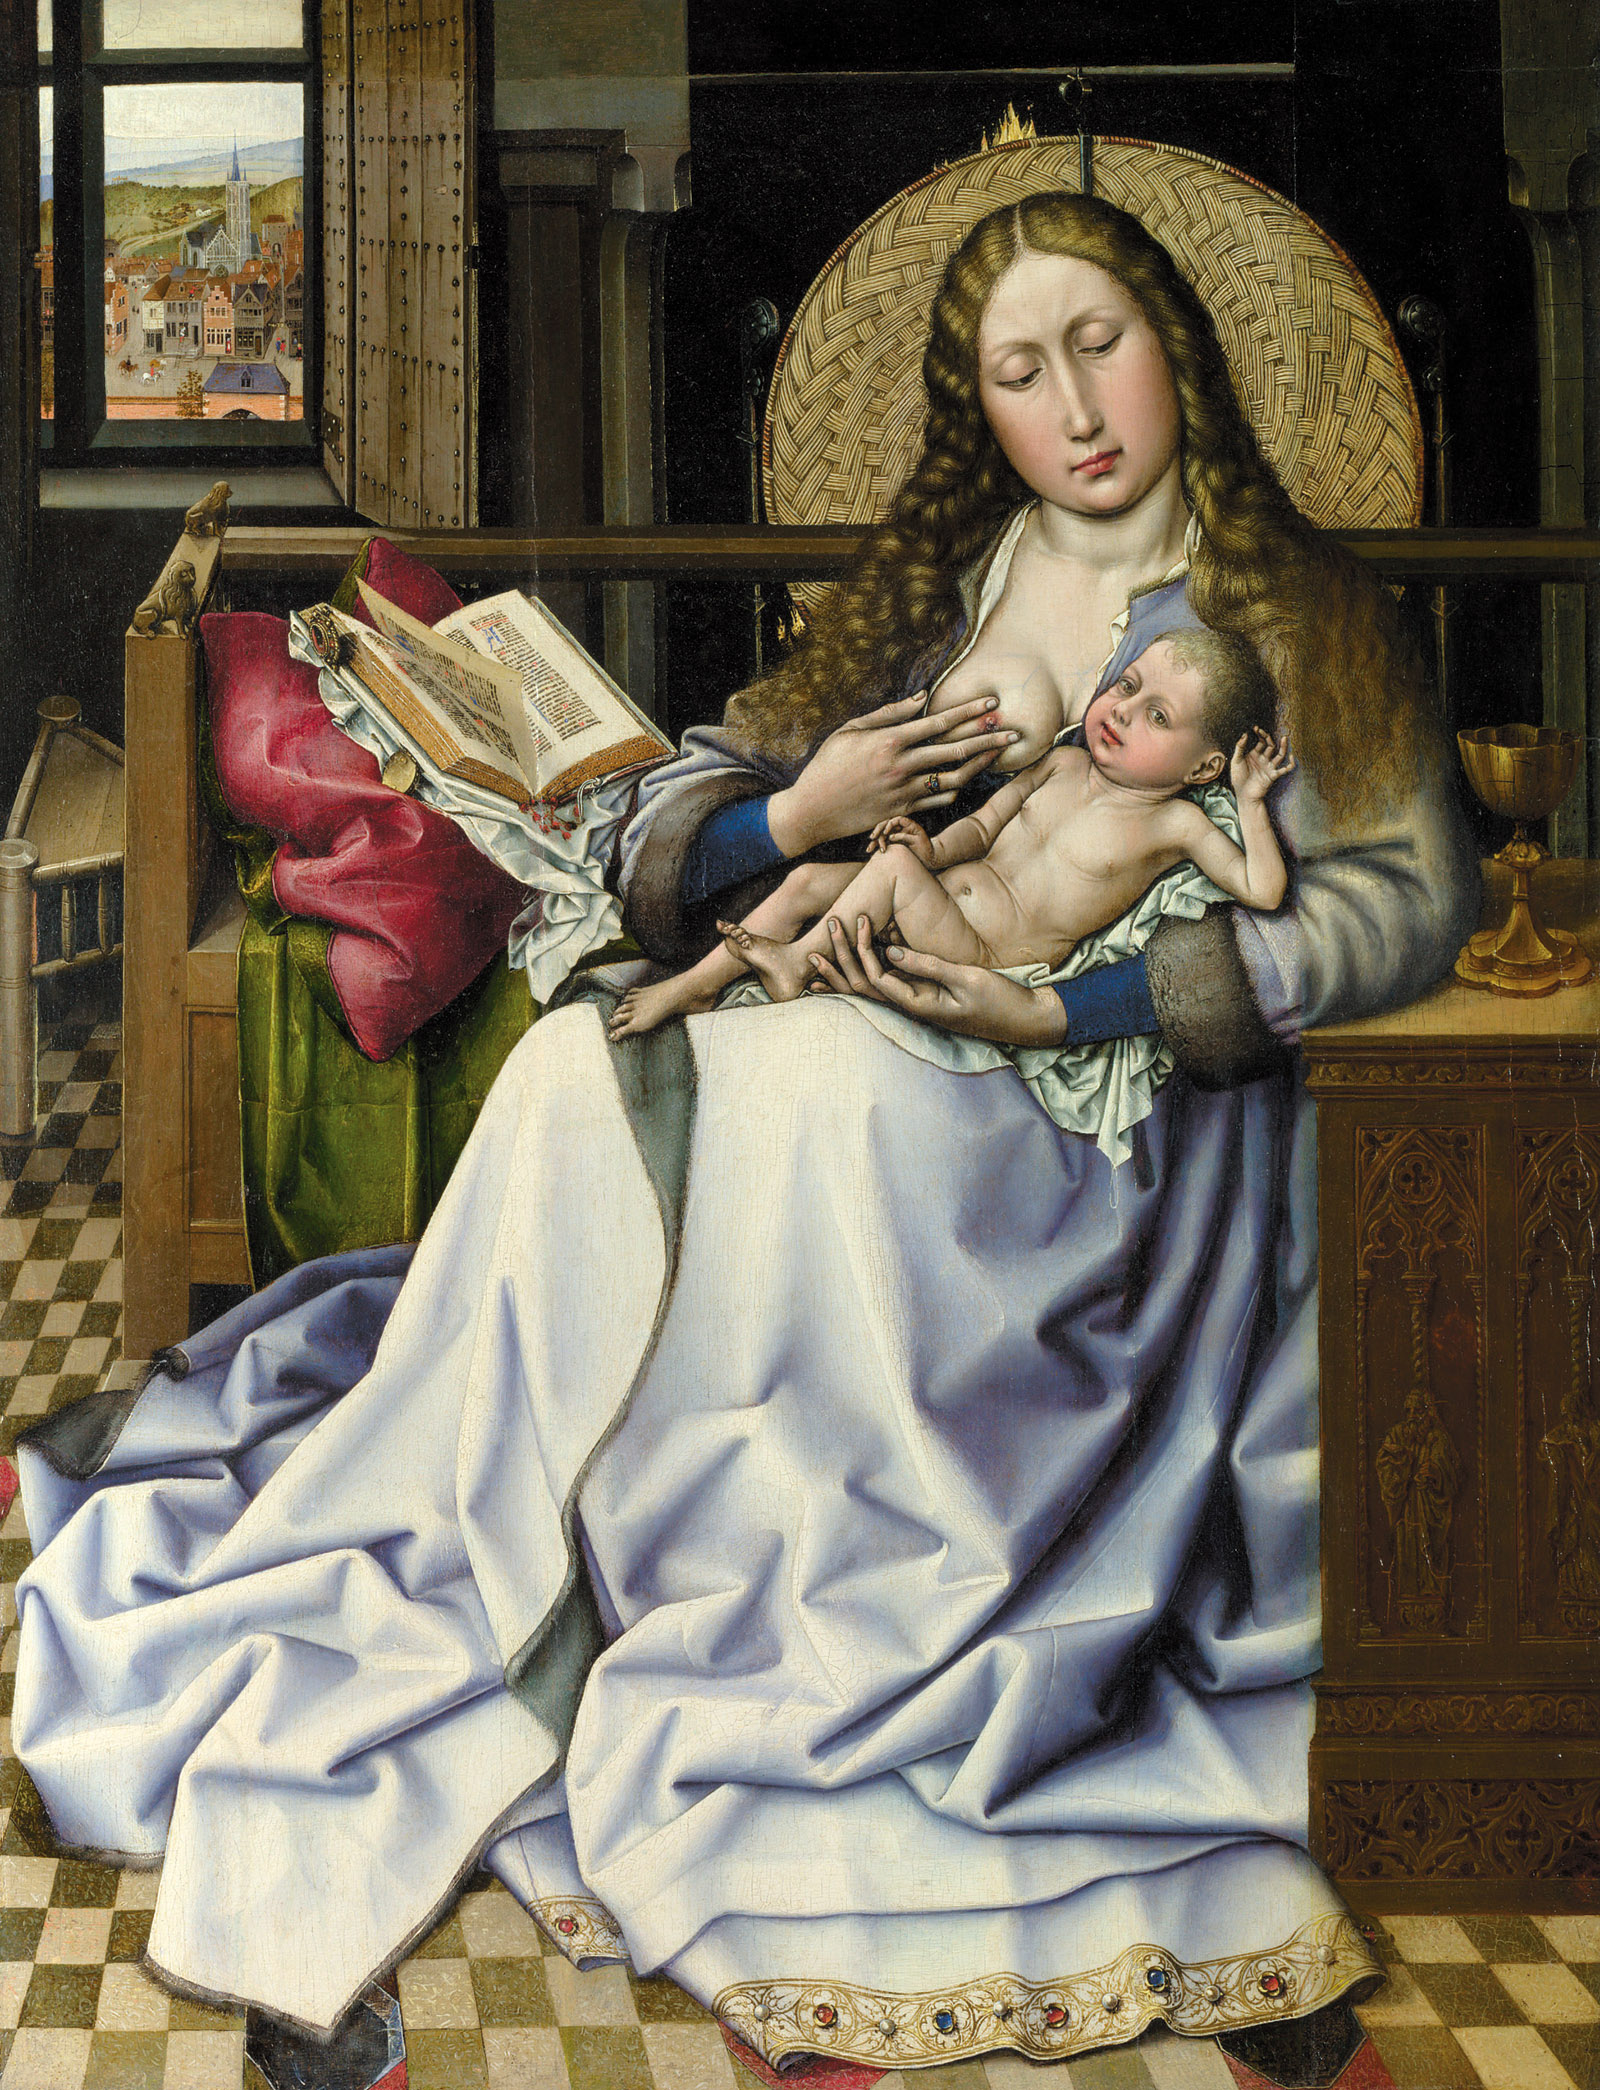 Robert Campin's painting, The Virgin and Child Before a Firescreen, circa 1440